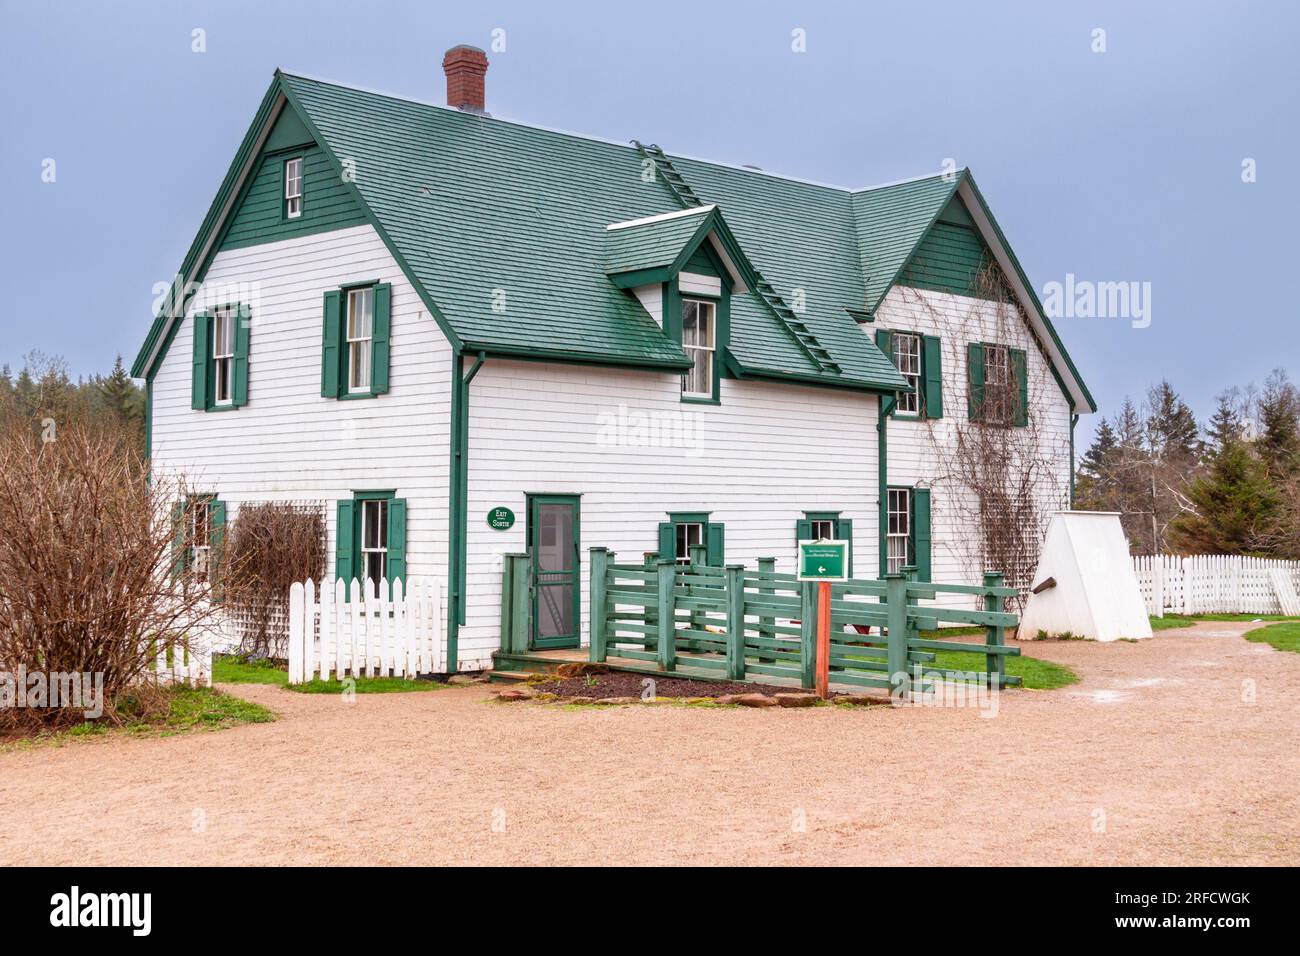 Anne of Green Gables tourist attraction on stormy day on Prince Edward Island, Canada. Stock Photo